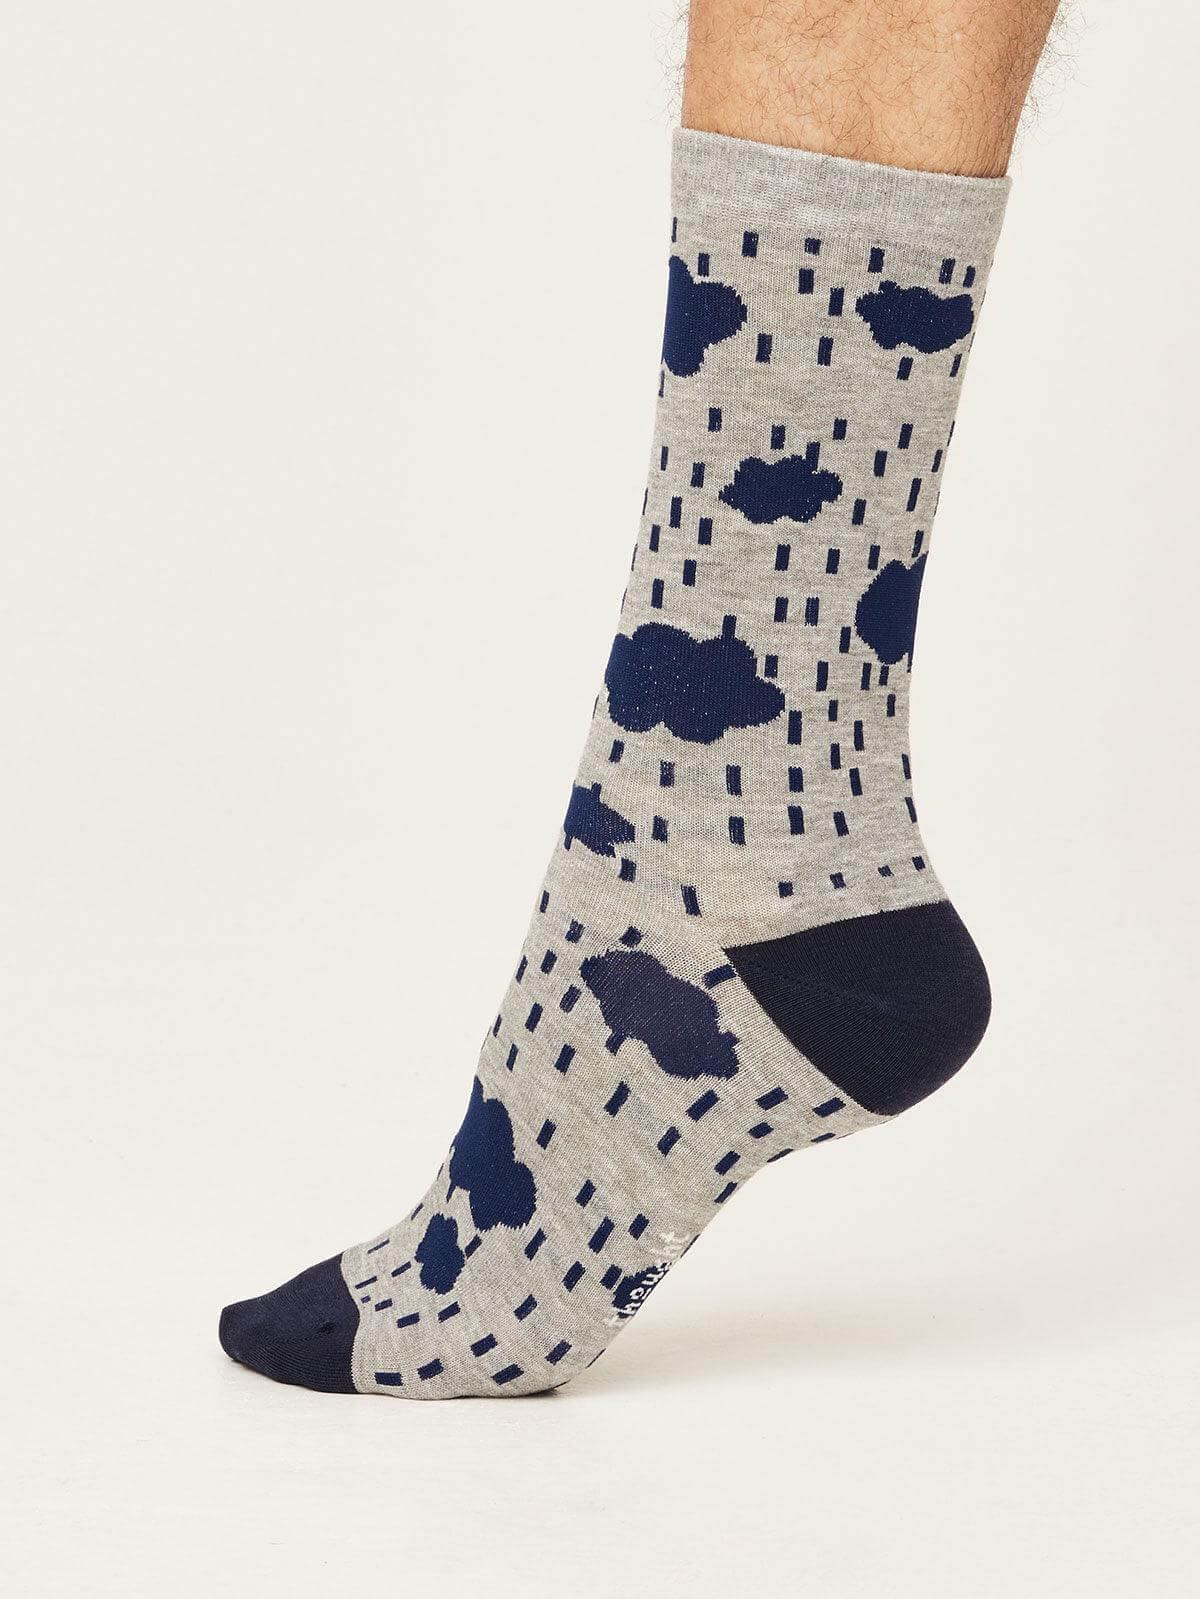 9 Brands Making Snuggly Organic Cotton & Bamboo Socks - The Good Trade